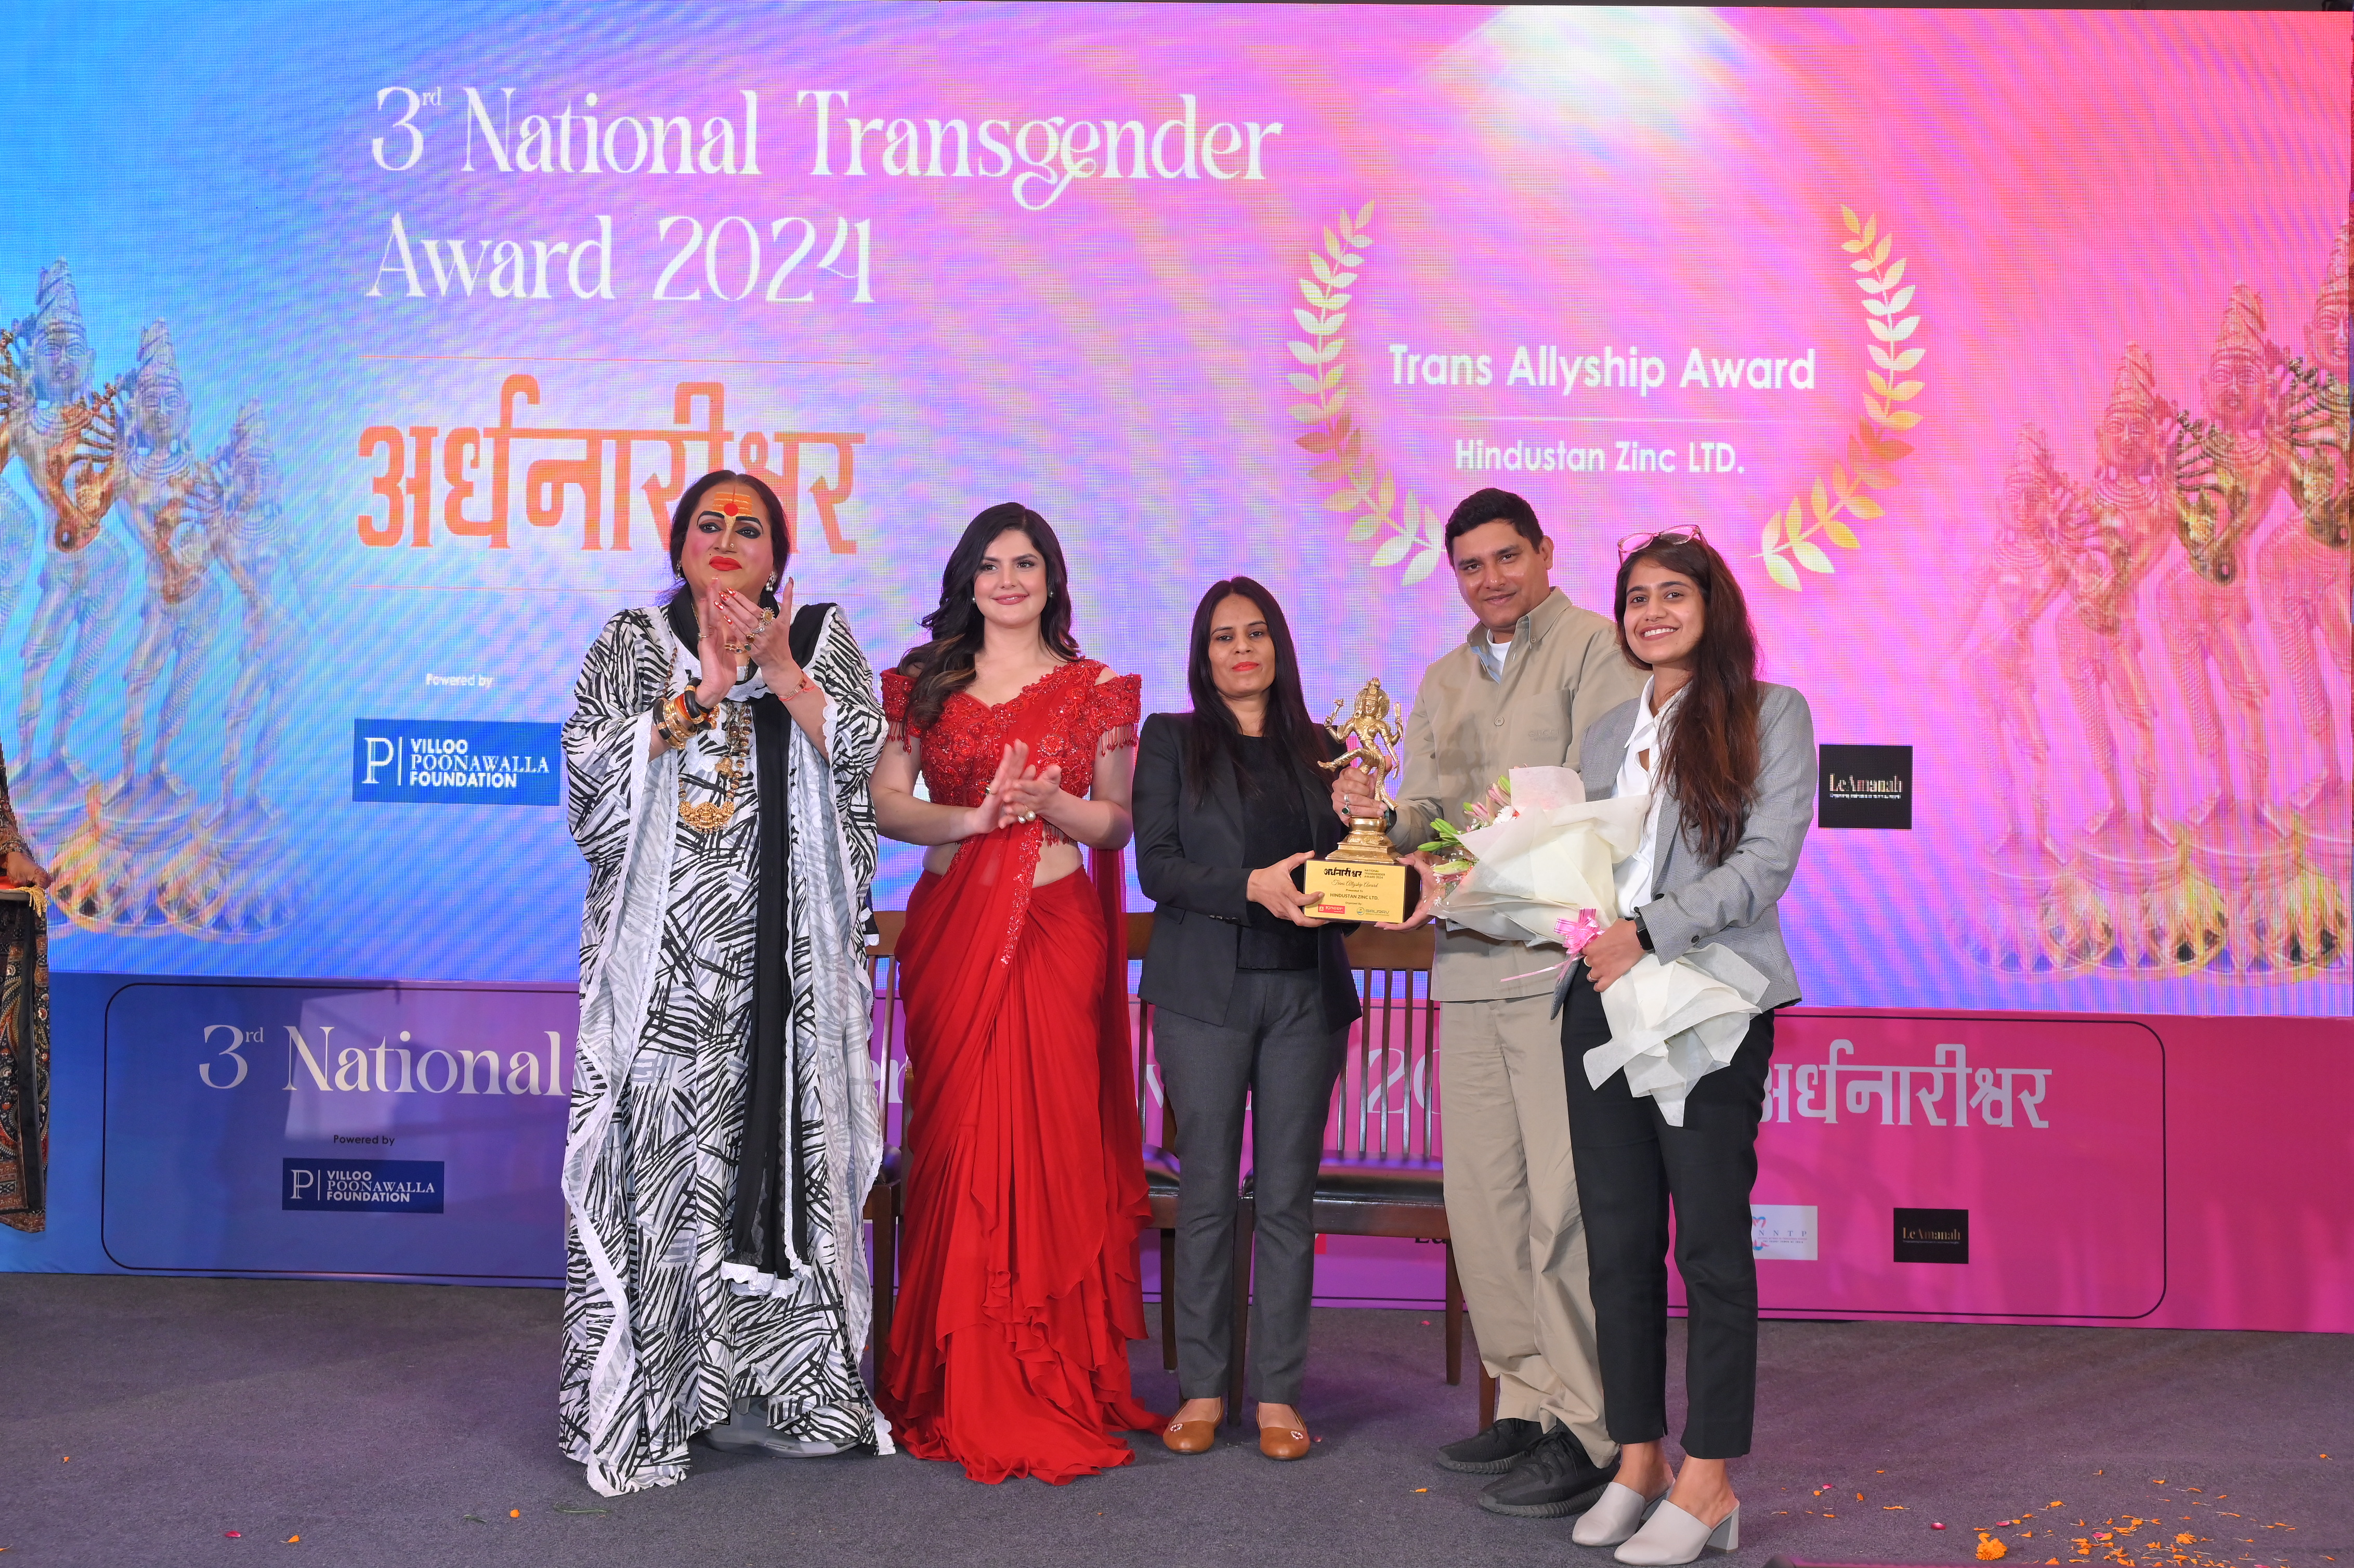 Hindustan Zinc Recognized for Pioneering LGBTQIA+ Inclusion Efforts at the 3rd National Transgender Awards 2024